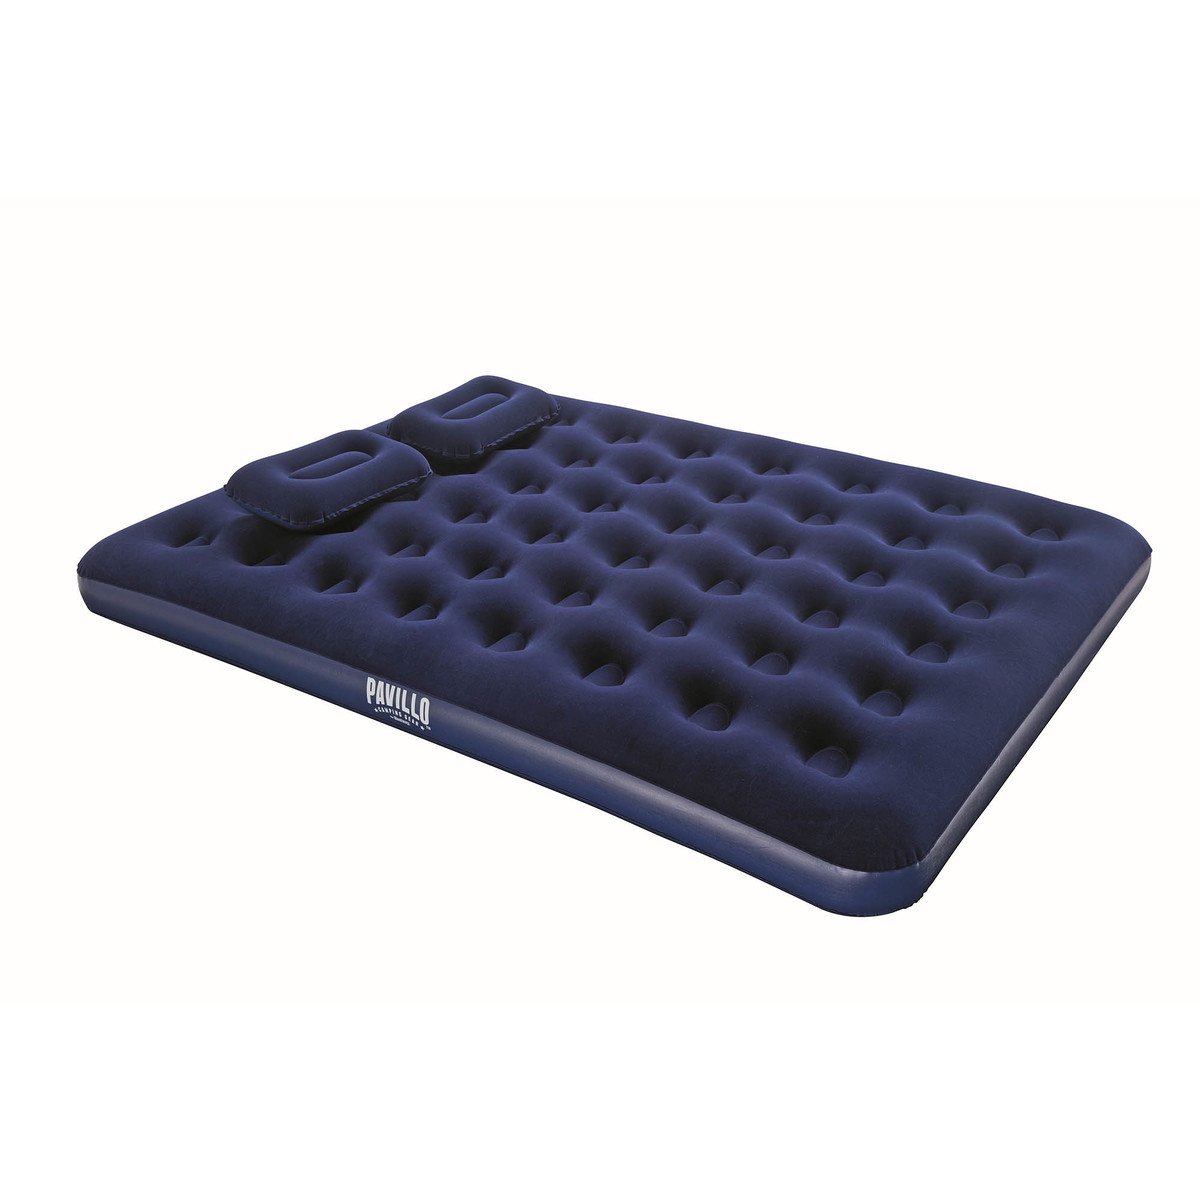 Best Way AirBed With AirPump 67374